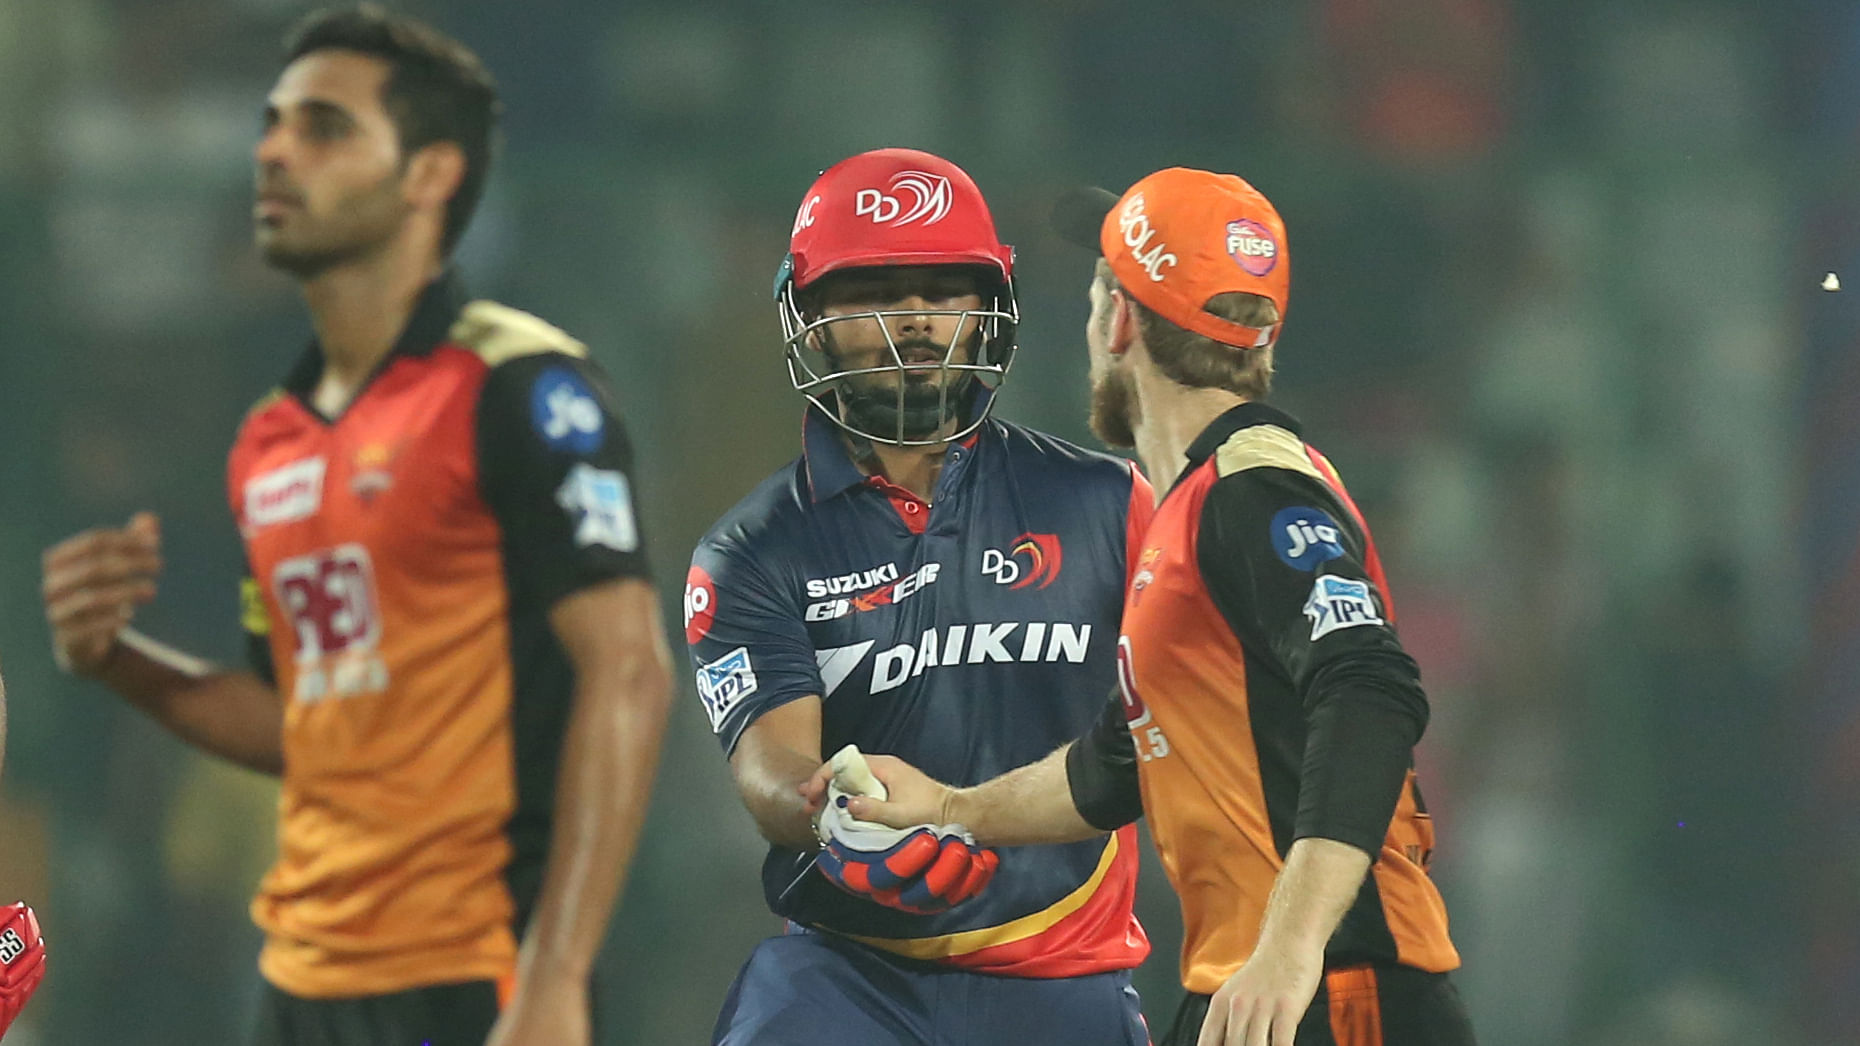 Kane Williamson of the Sunrisers Hyderabad shakes hand with Rishab Pant of the Delhi Daredevils after he completes a century at the Feroz Shah Kotla Ground.